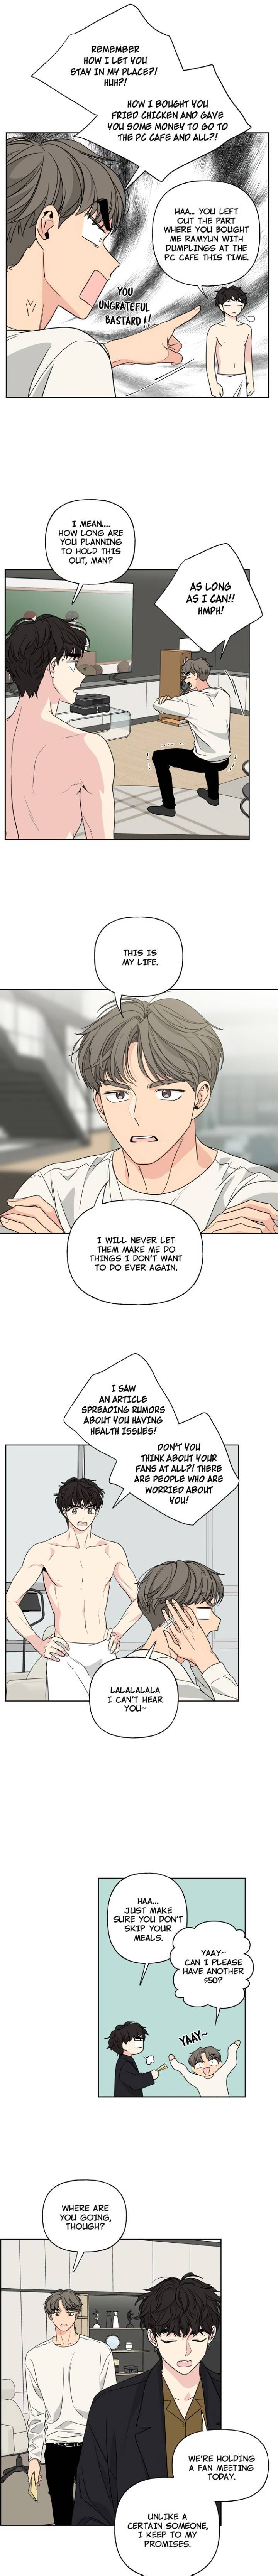 mother-im-sorry-chap-35-8